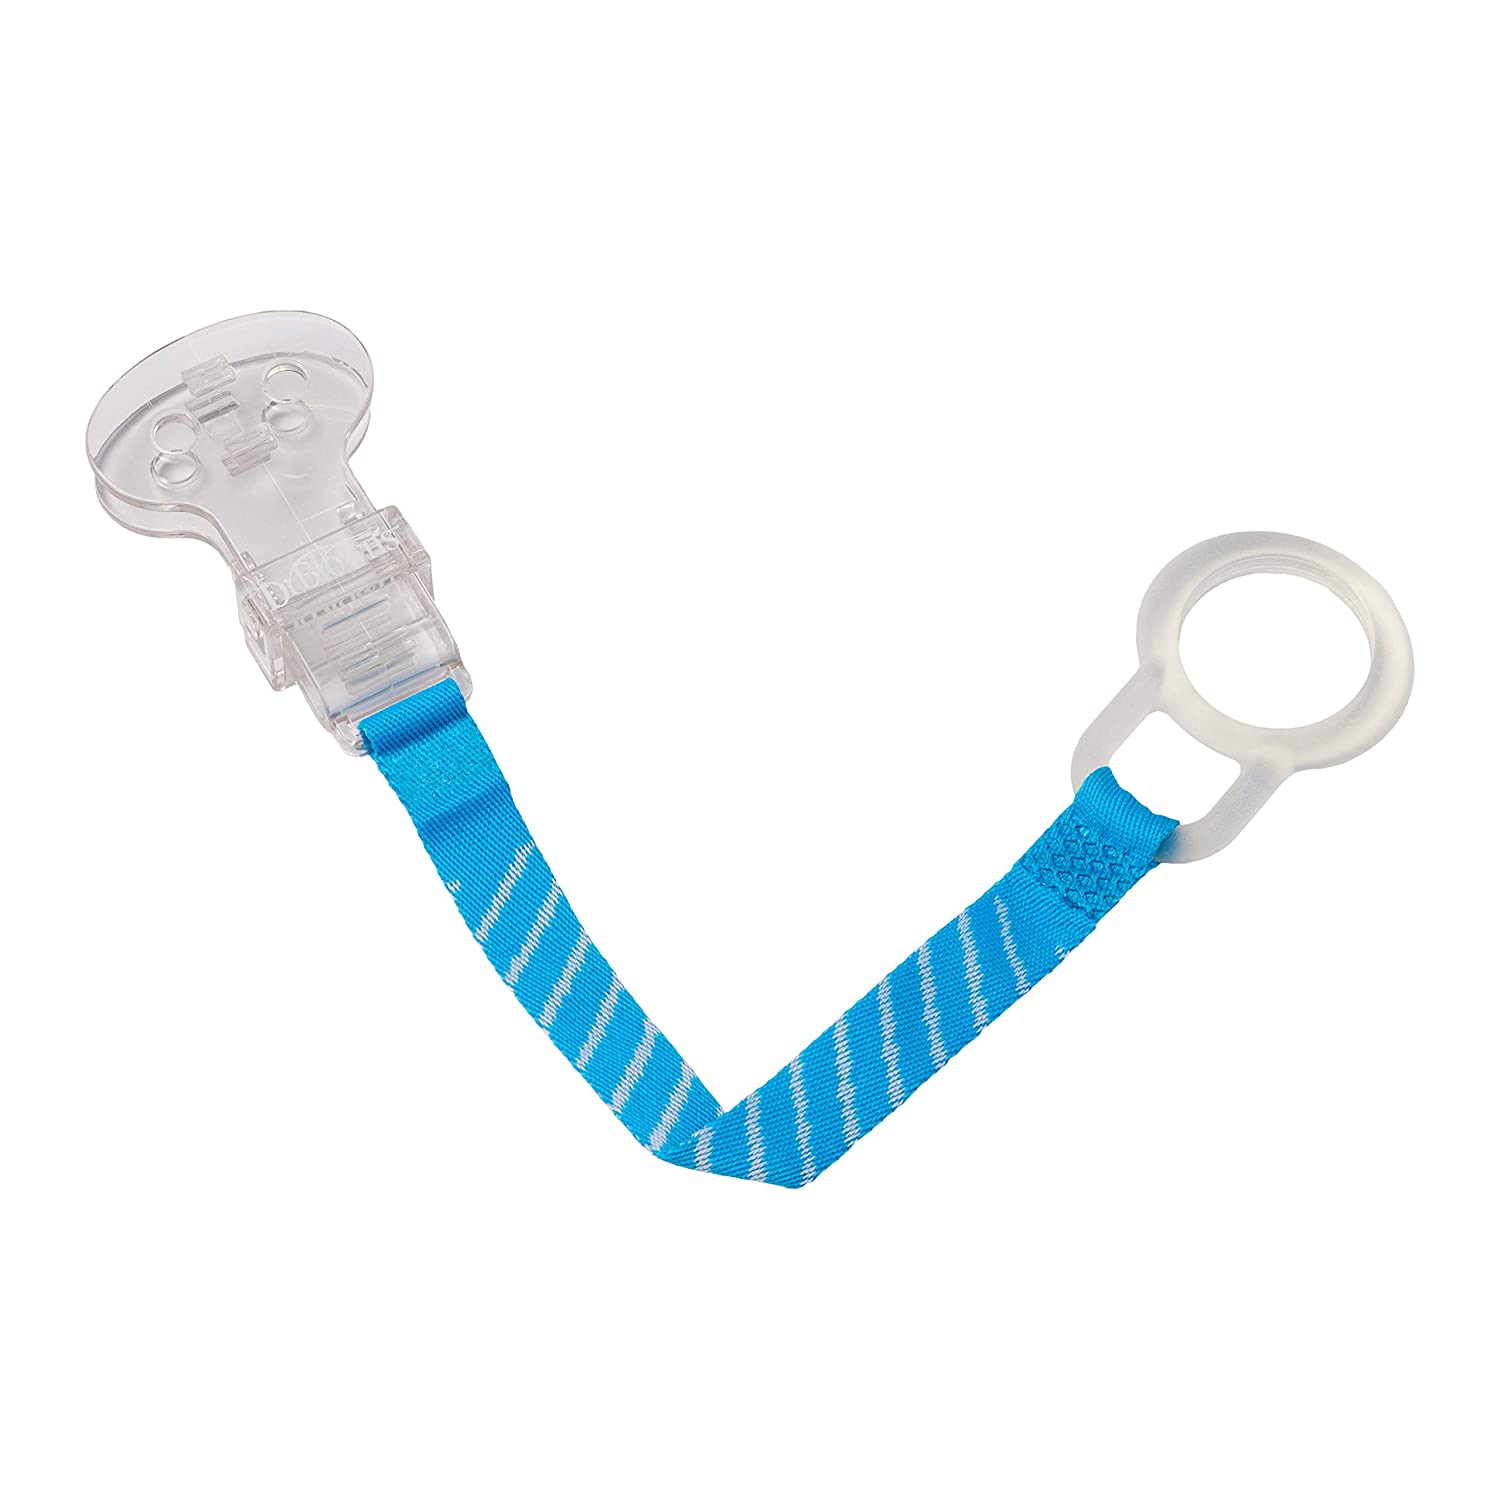 Dr Brown's Pacifier & Teether Clip